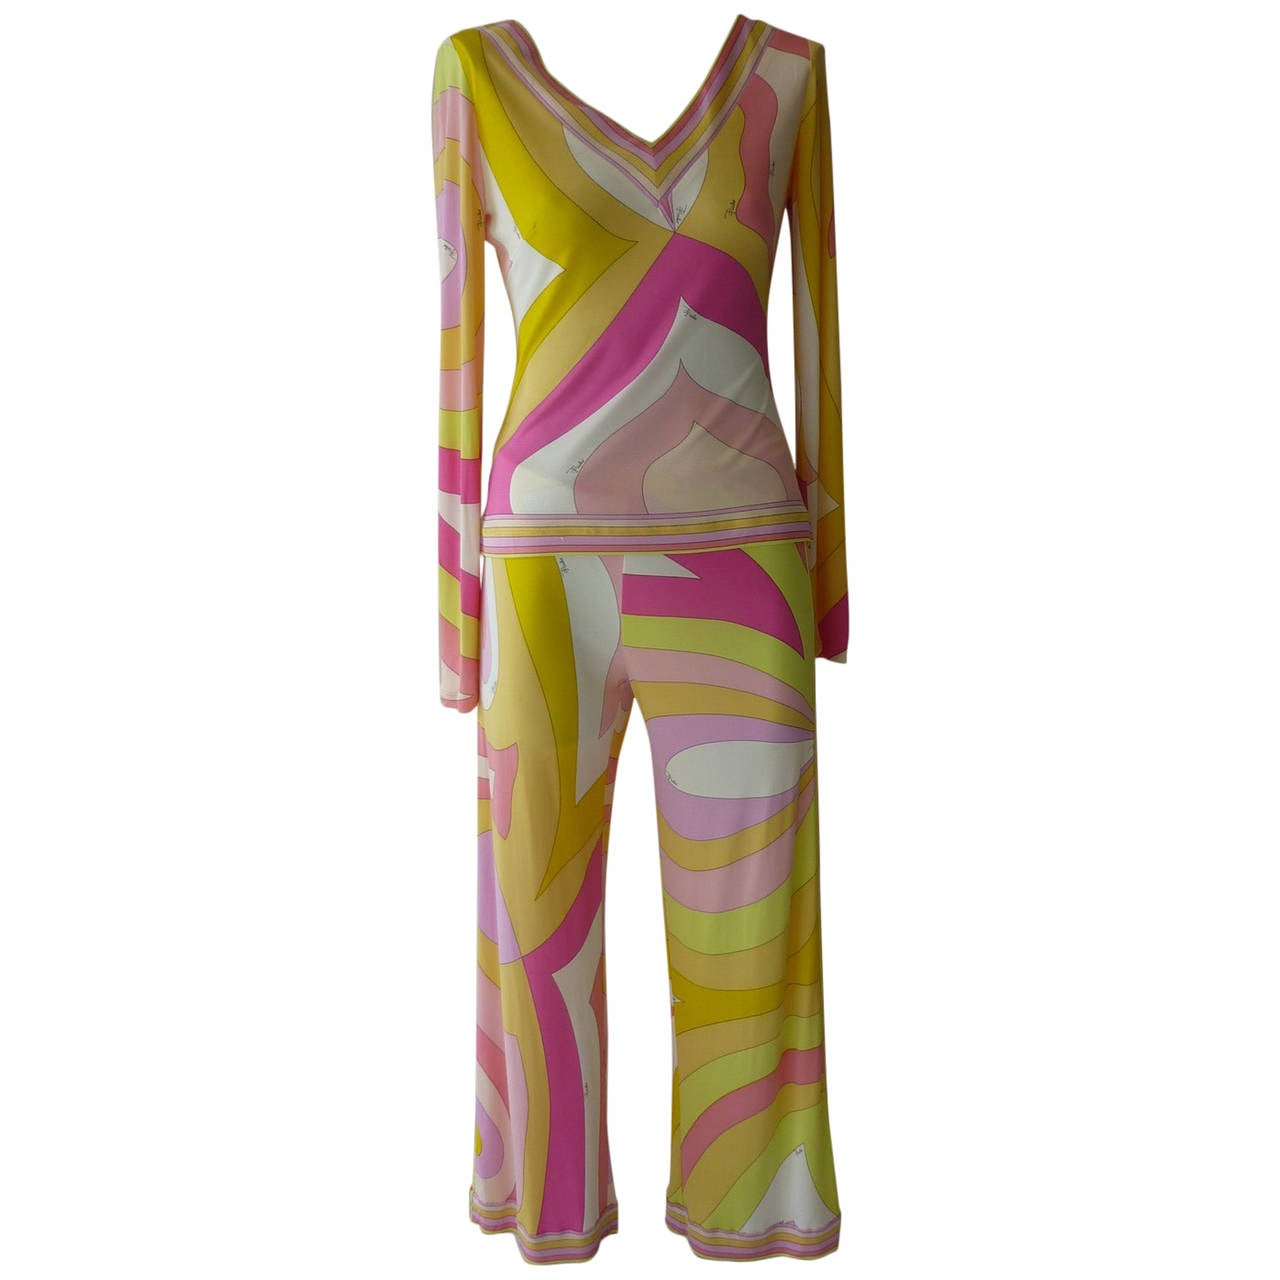 2000s Emilio Pucci Three-Piece Silk Jersey Outfit